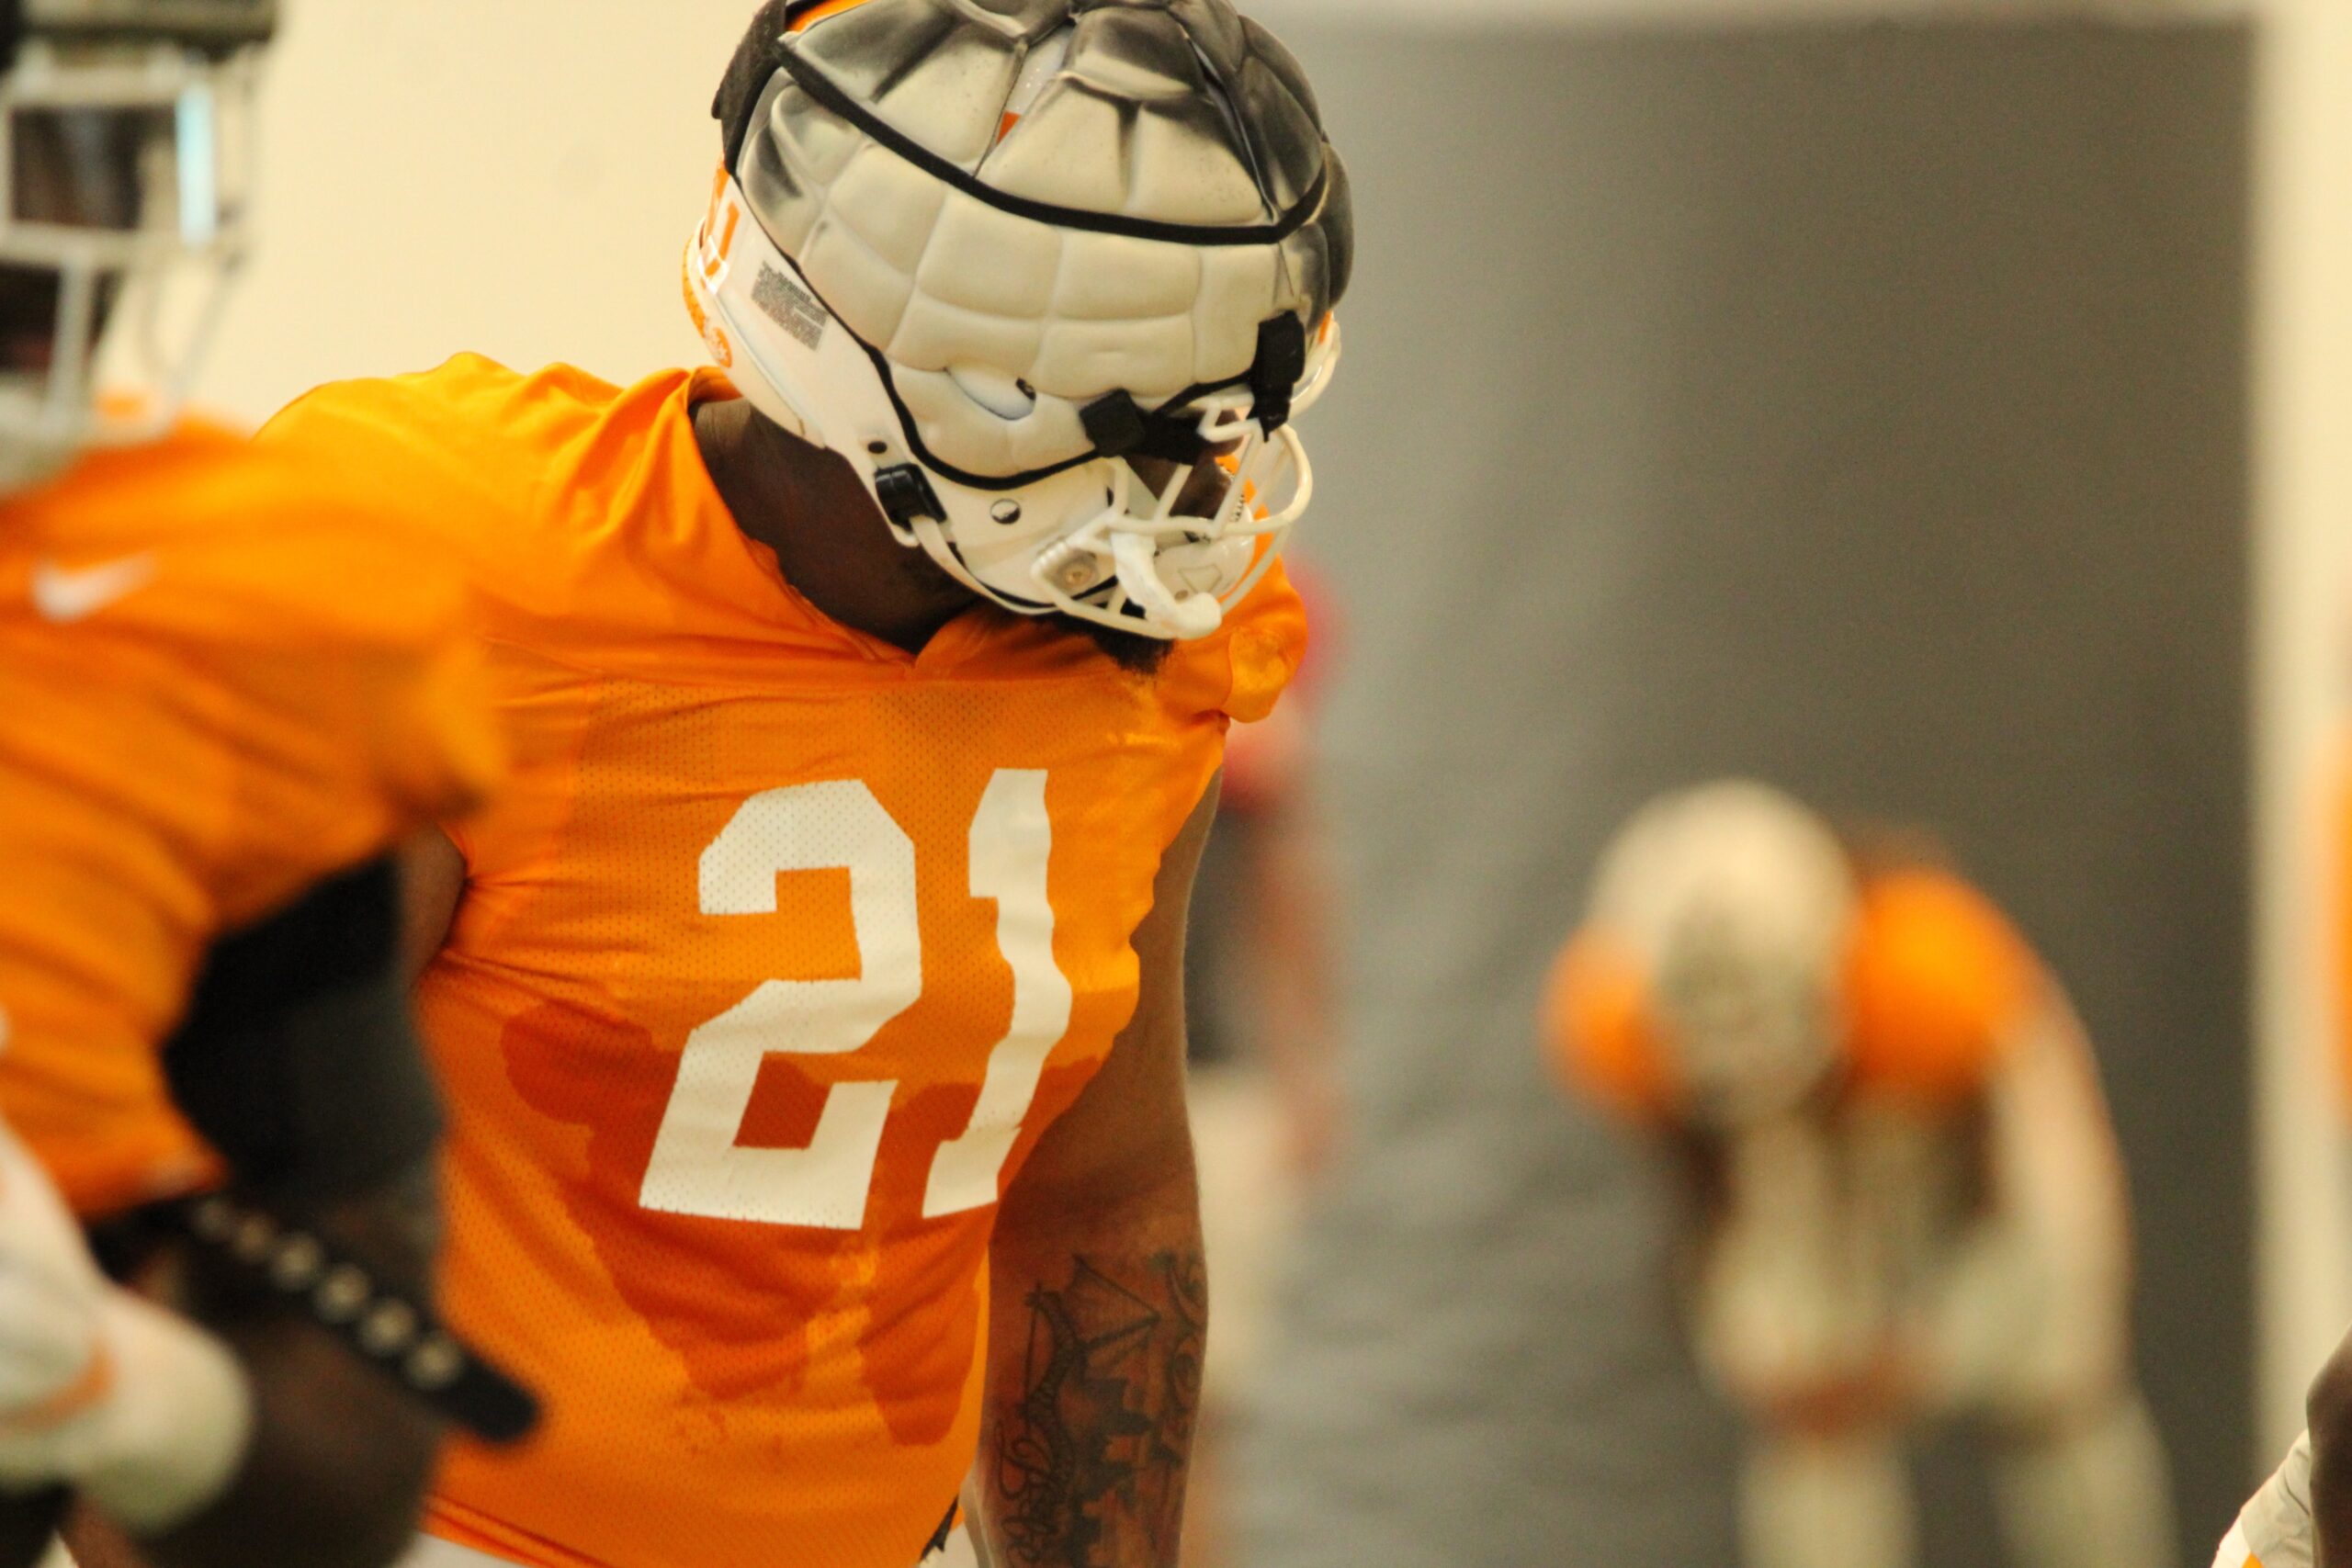 Spring practices: Omari Thomas discusses continuing to play physical, fast off the ball